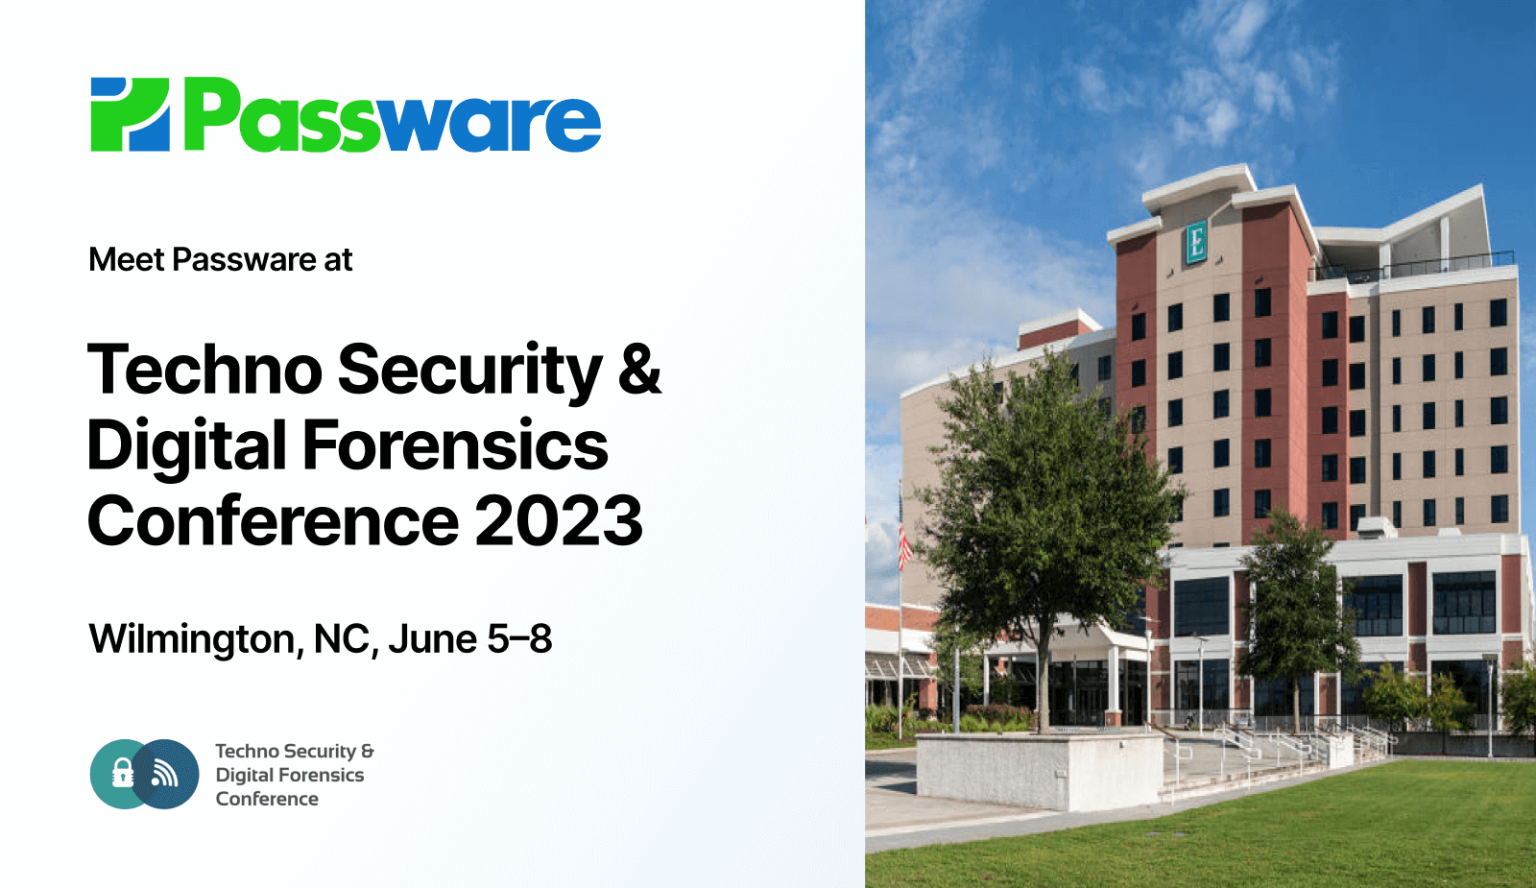 Techno Security & Digital Forensics Conference 2023 Passware Blog